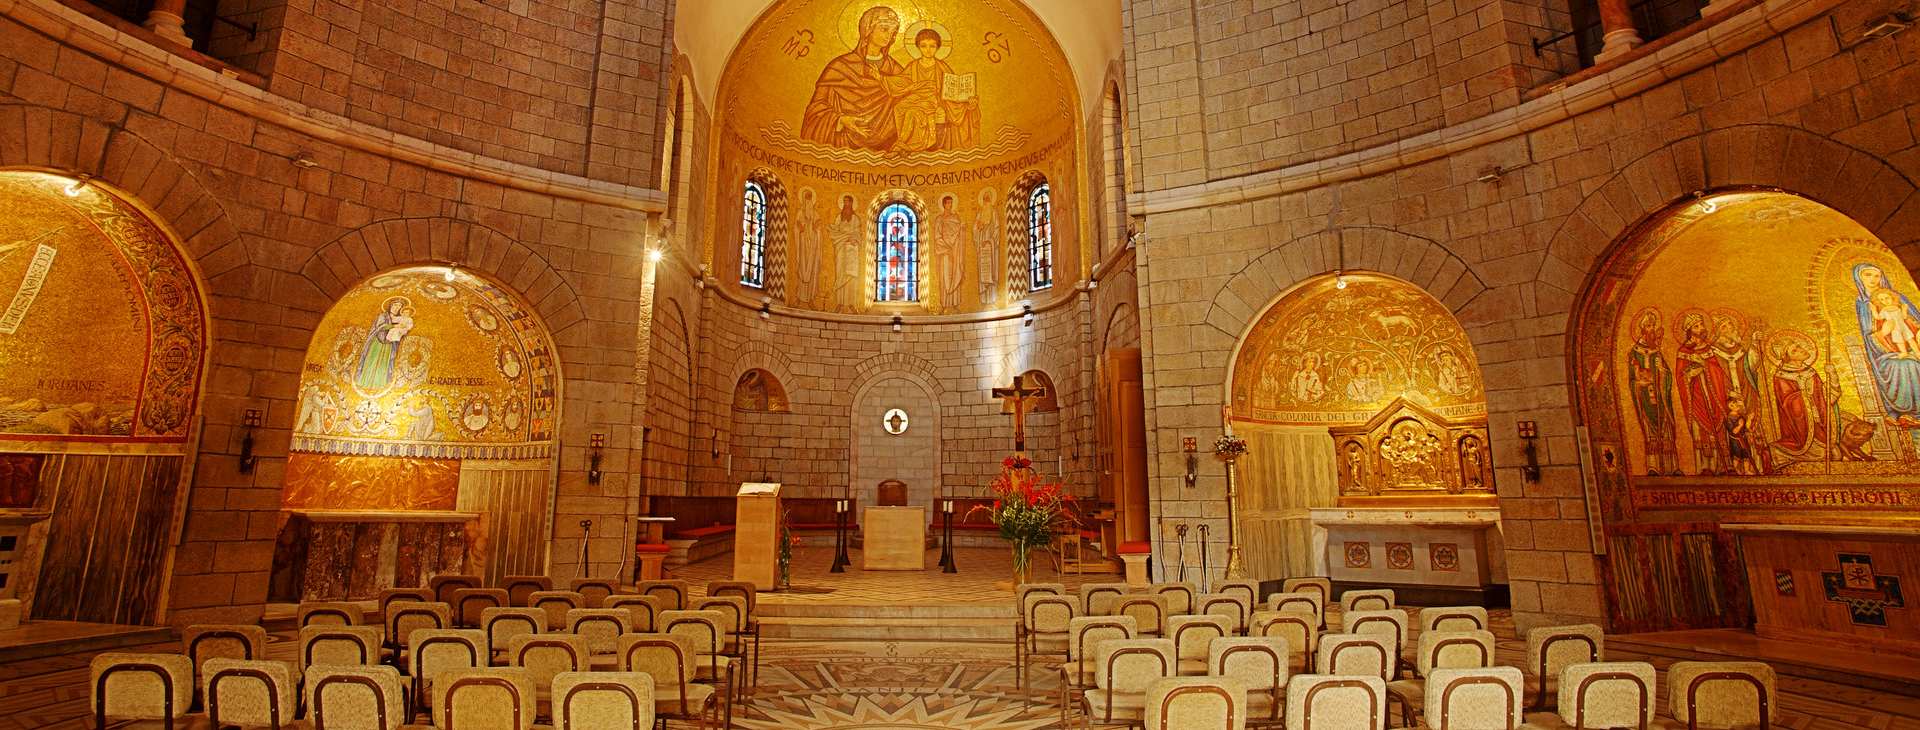 photo of The Dormition Abbey